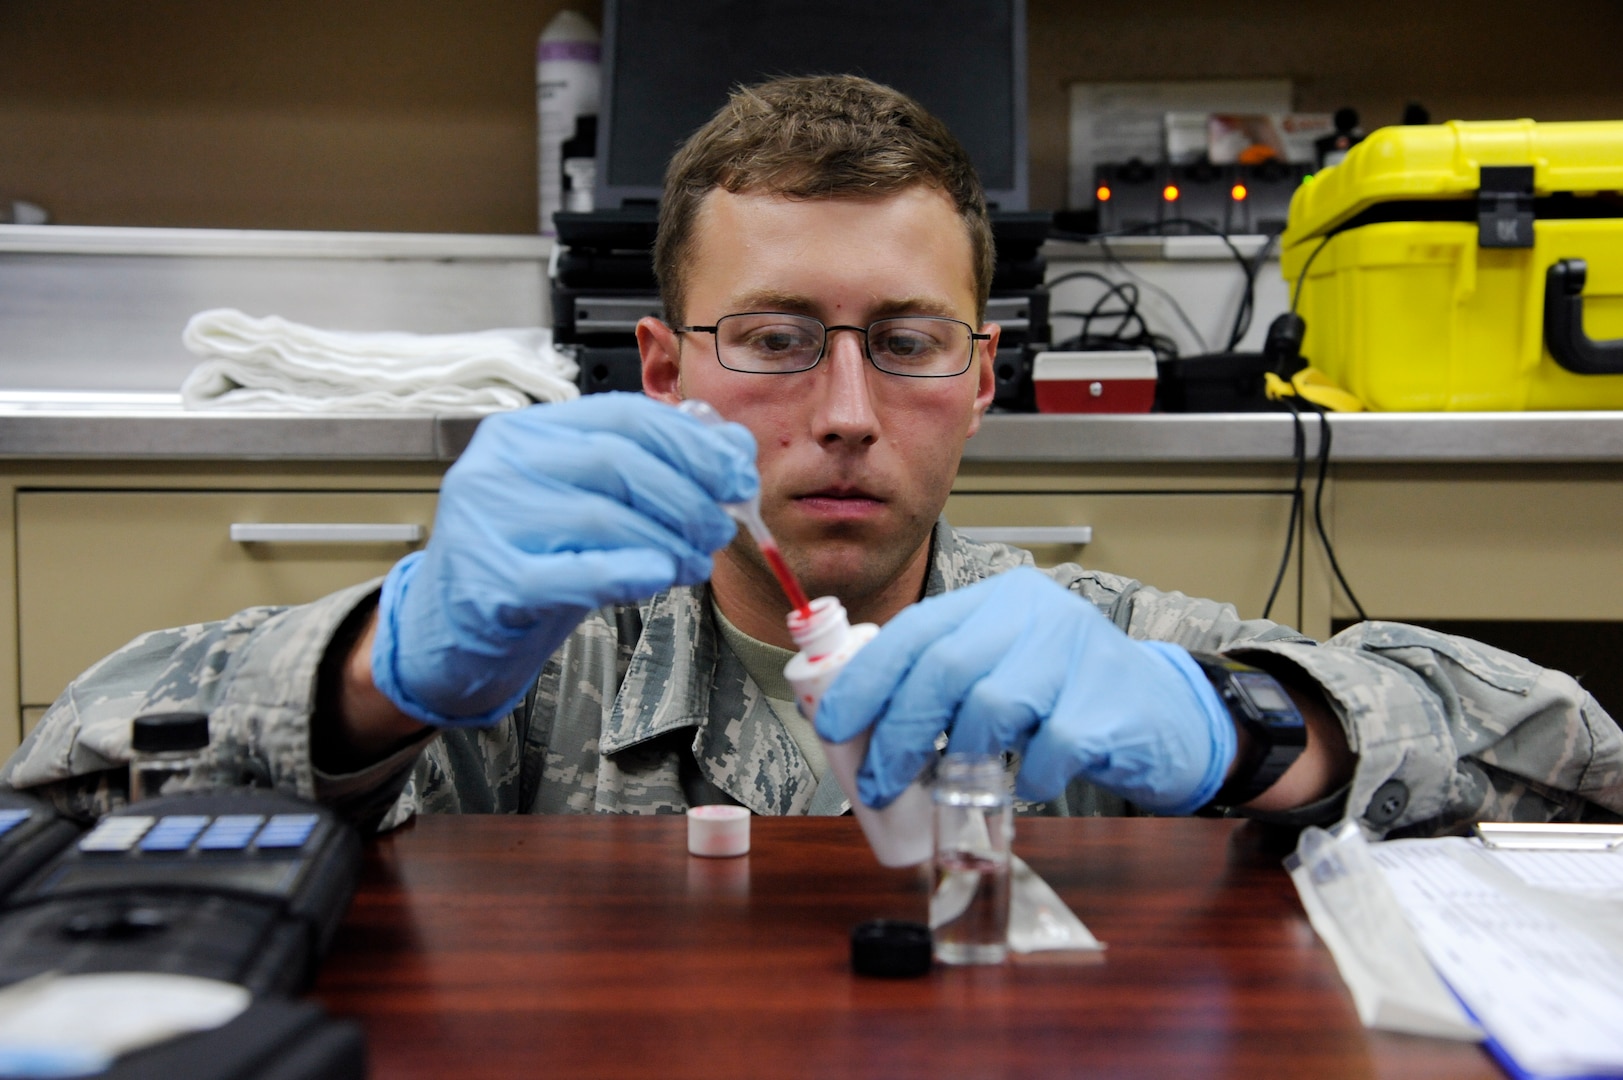 Airman 1st Class Tyler Brantley, 359th Medical Group bioenvironmental engineering, tests the pH levels in a water sample June 19 at Joint Base San Antonio-Randolph. (U.S. Air Force photo by Desiree Palacios)